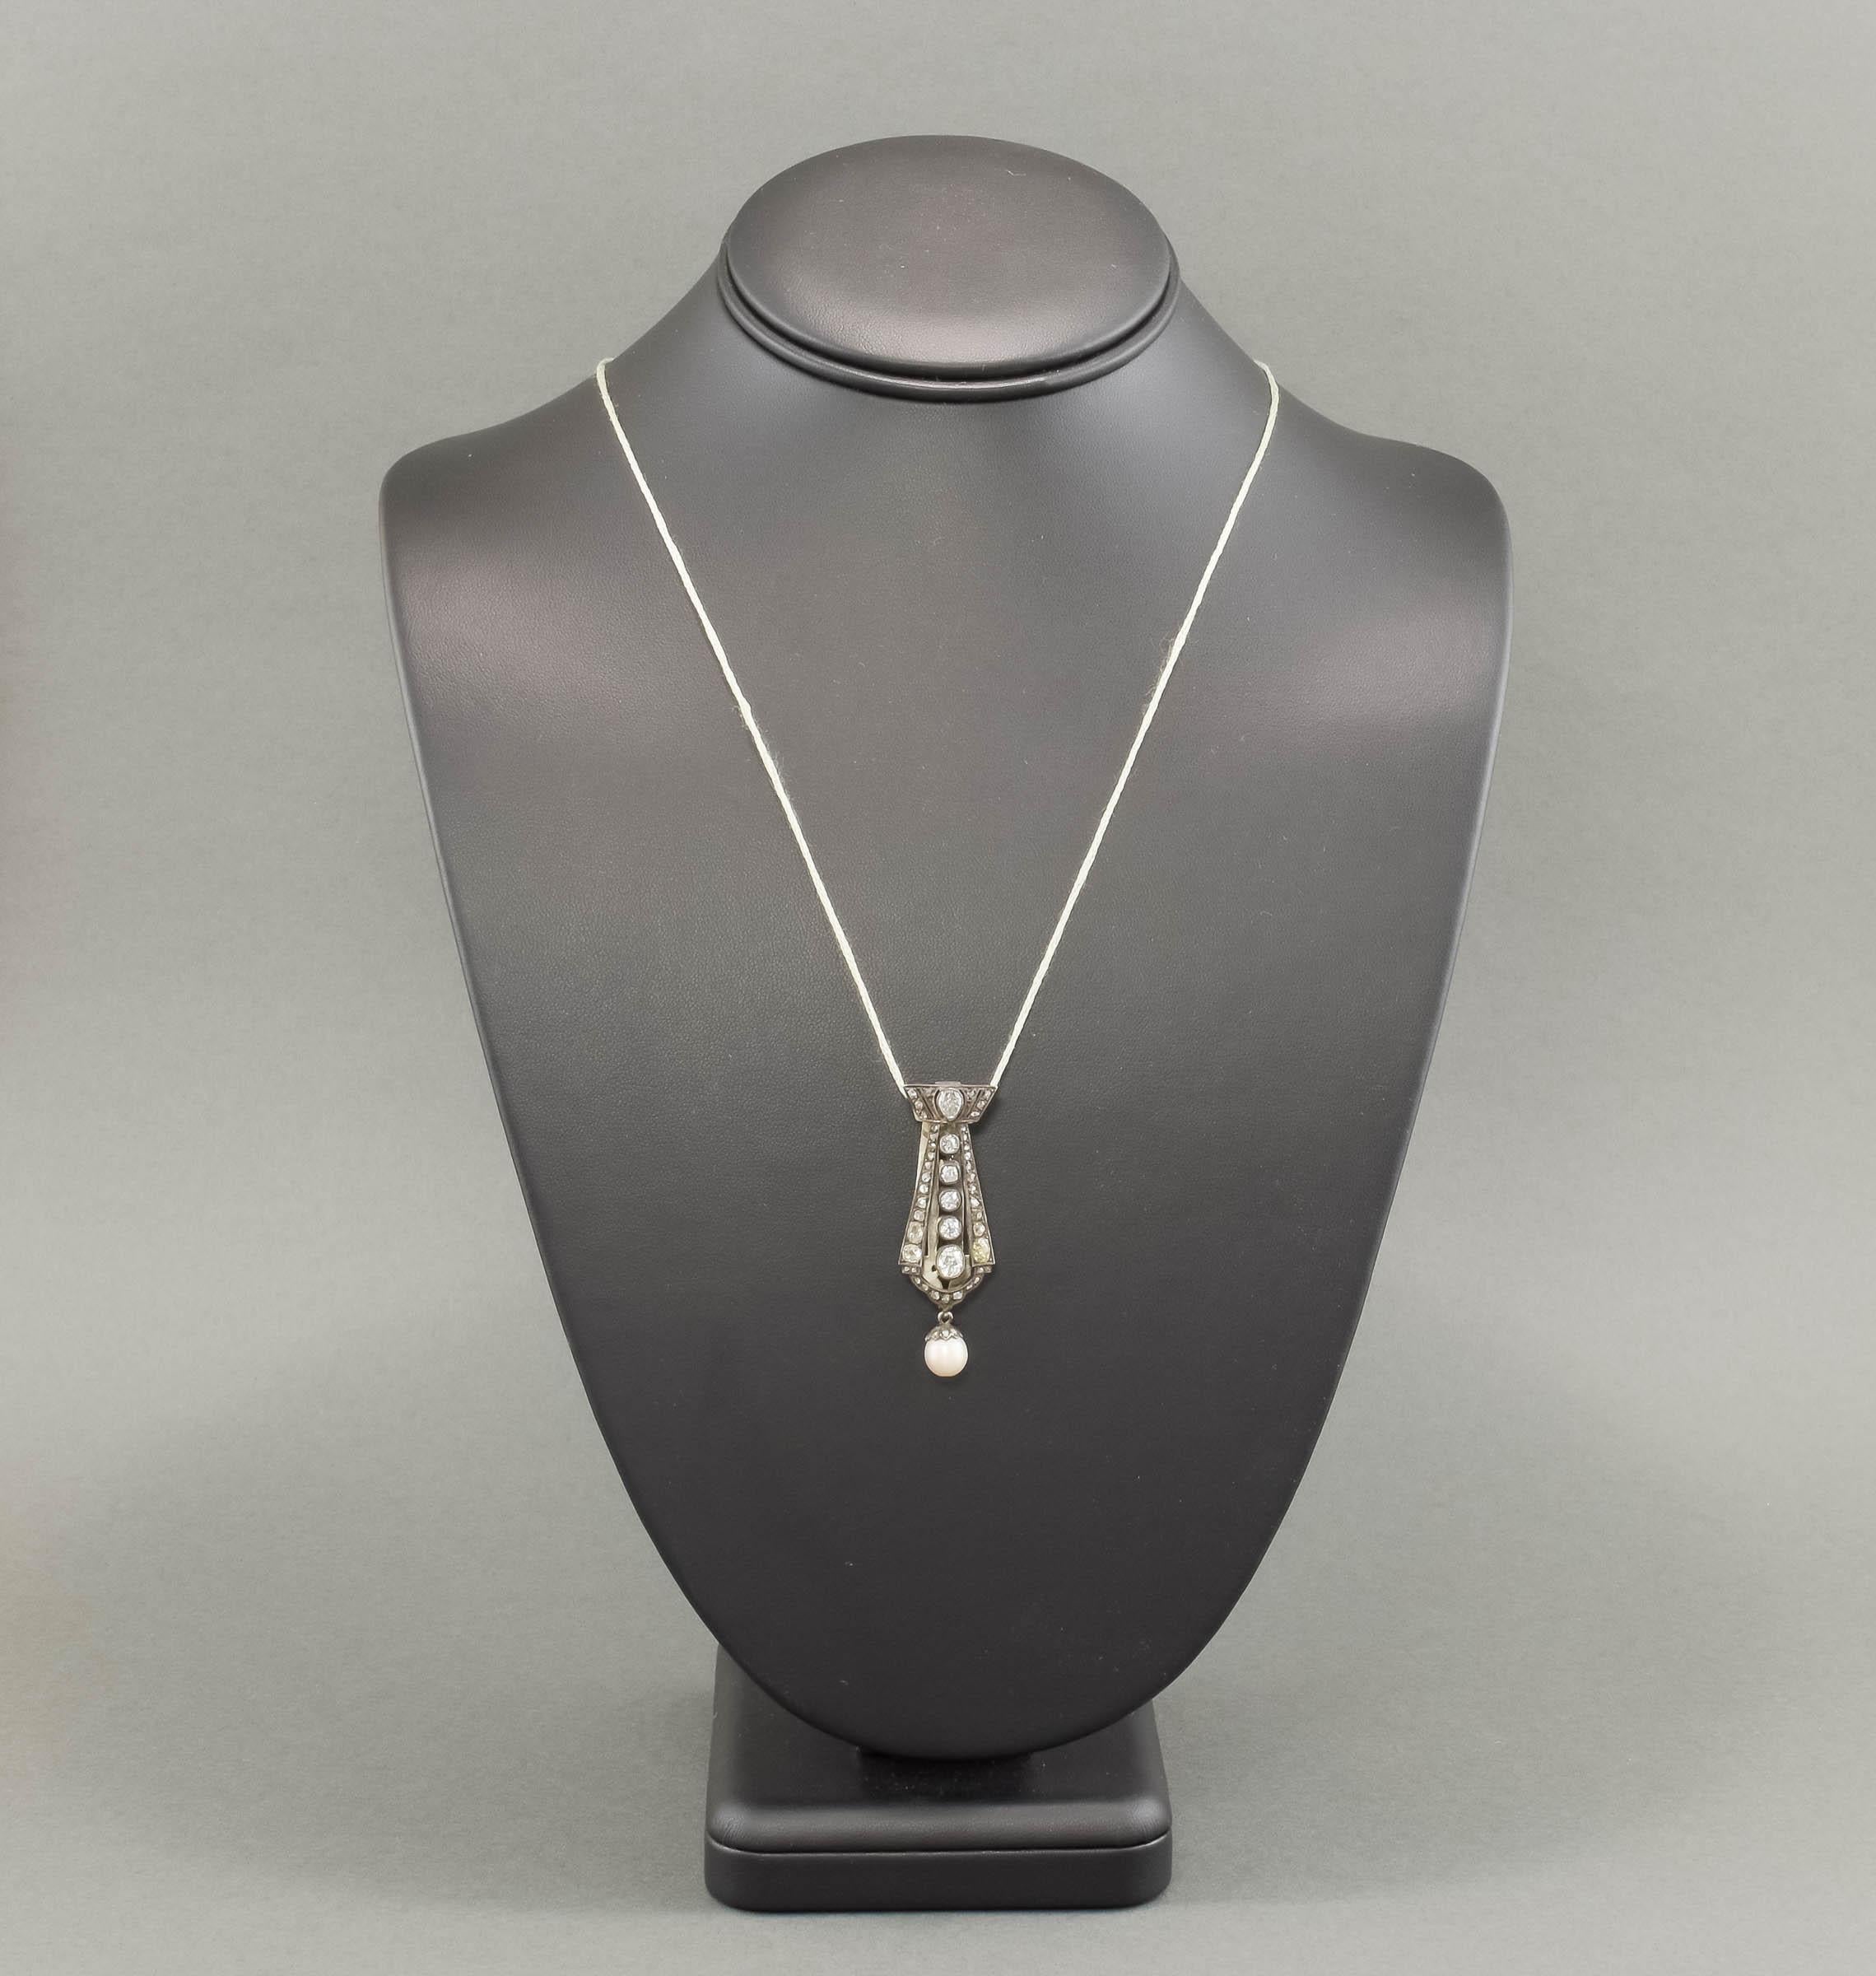 An absolutely stunning Victorian period Diamond & Pearl Pendant - Dress Clip with super fiery old mine cut & rose cut diamonds along with a sizable lustrous pearl drop.  Just gorgeous & so much more wonderful in person. (the diamonds are extremely